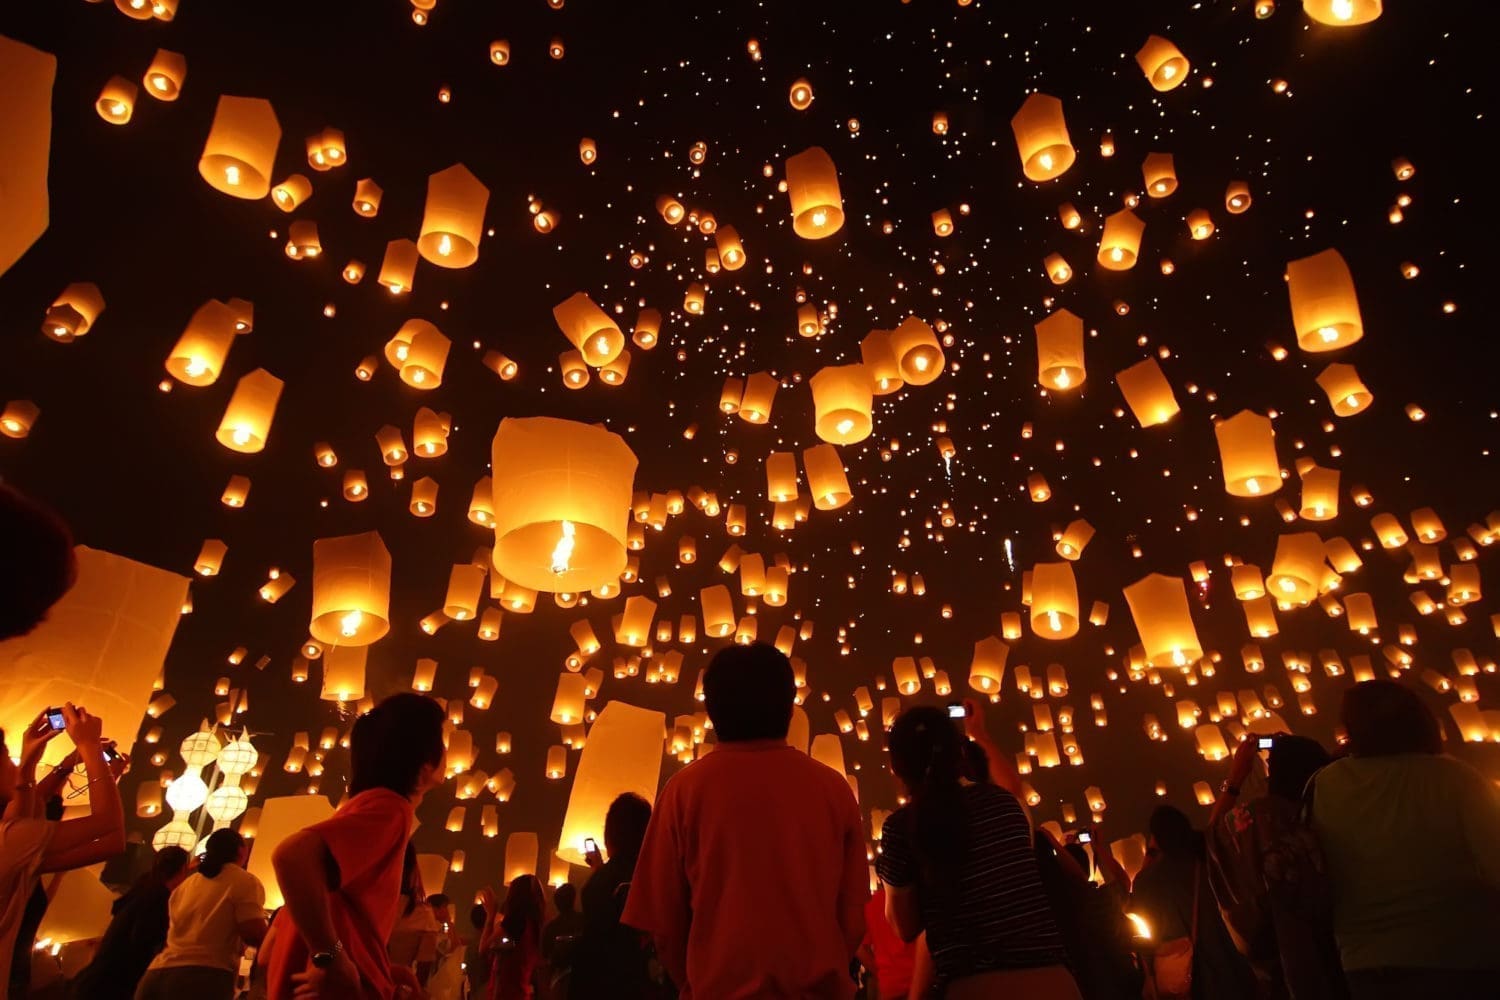 ALL YOU NEED TO KNOW ABOUT THE THAI LANTERN FESTIVAL